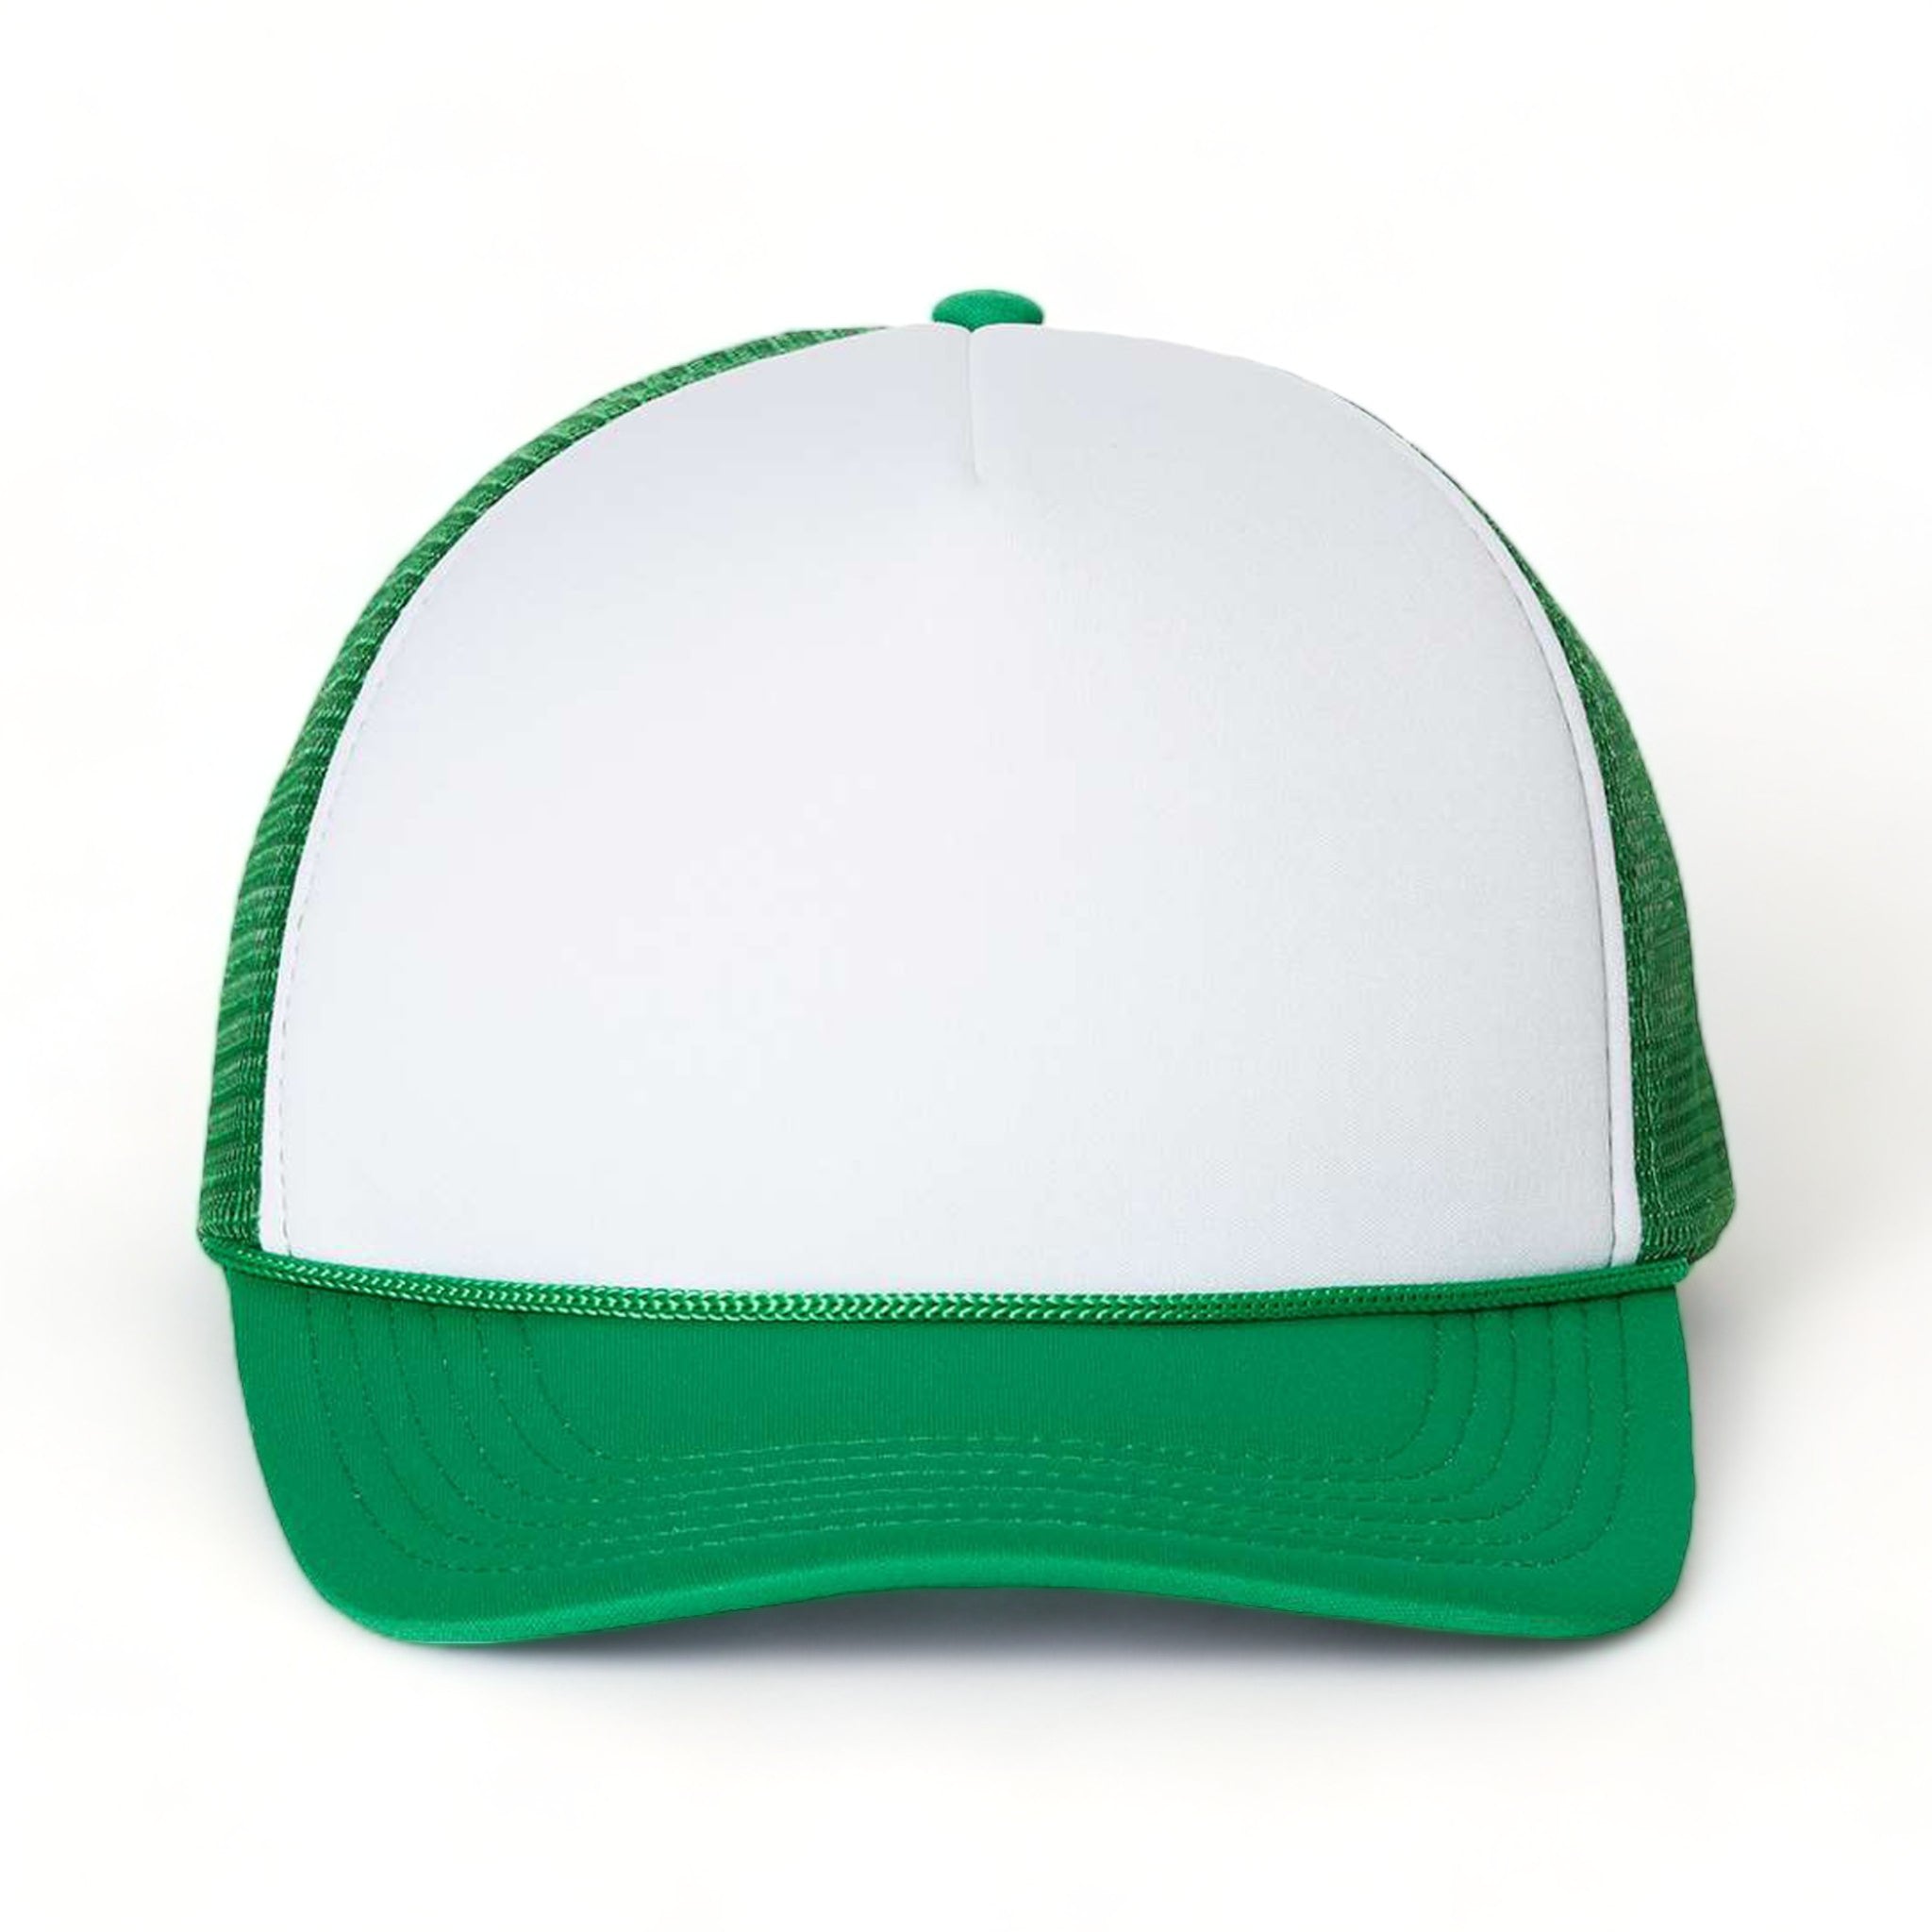 Front view of Valucap VC700 custom hat in white and kelly